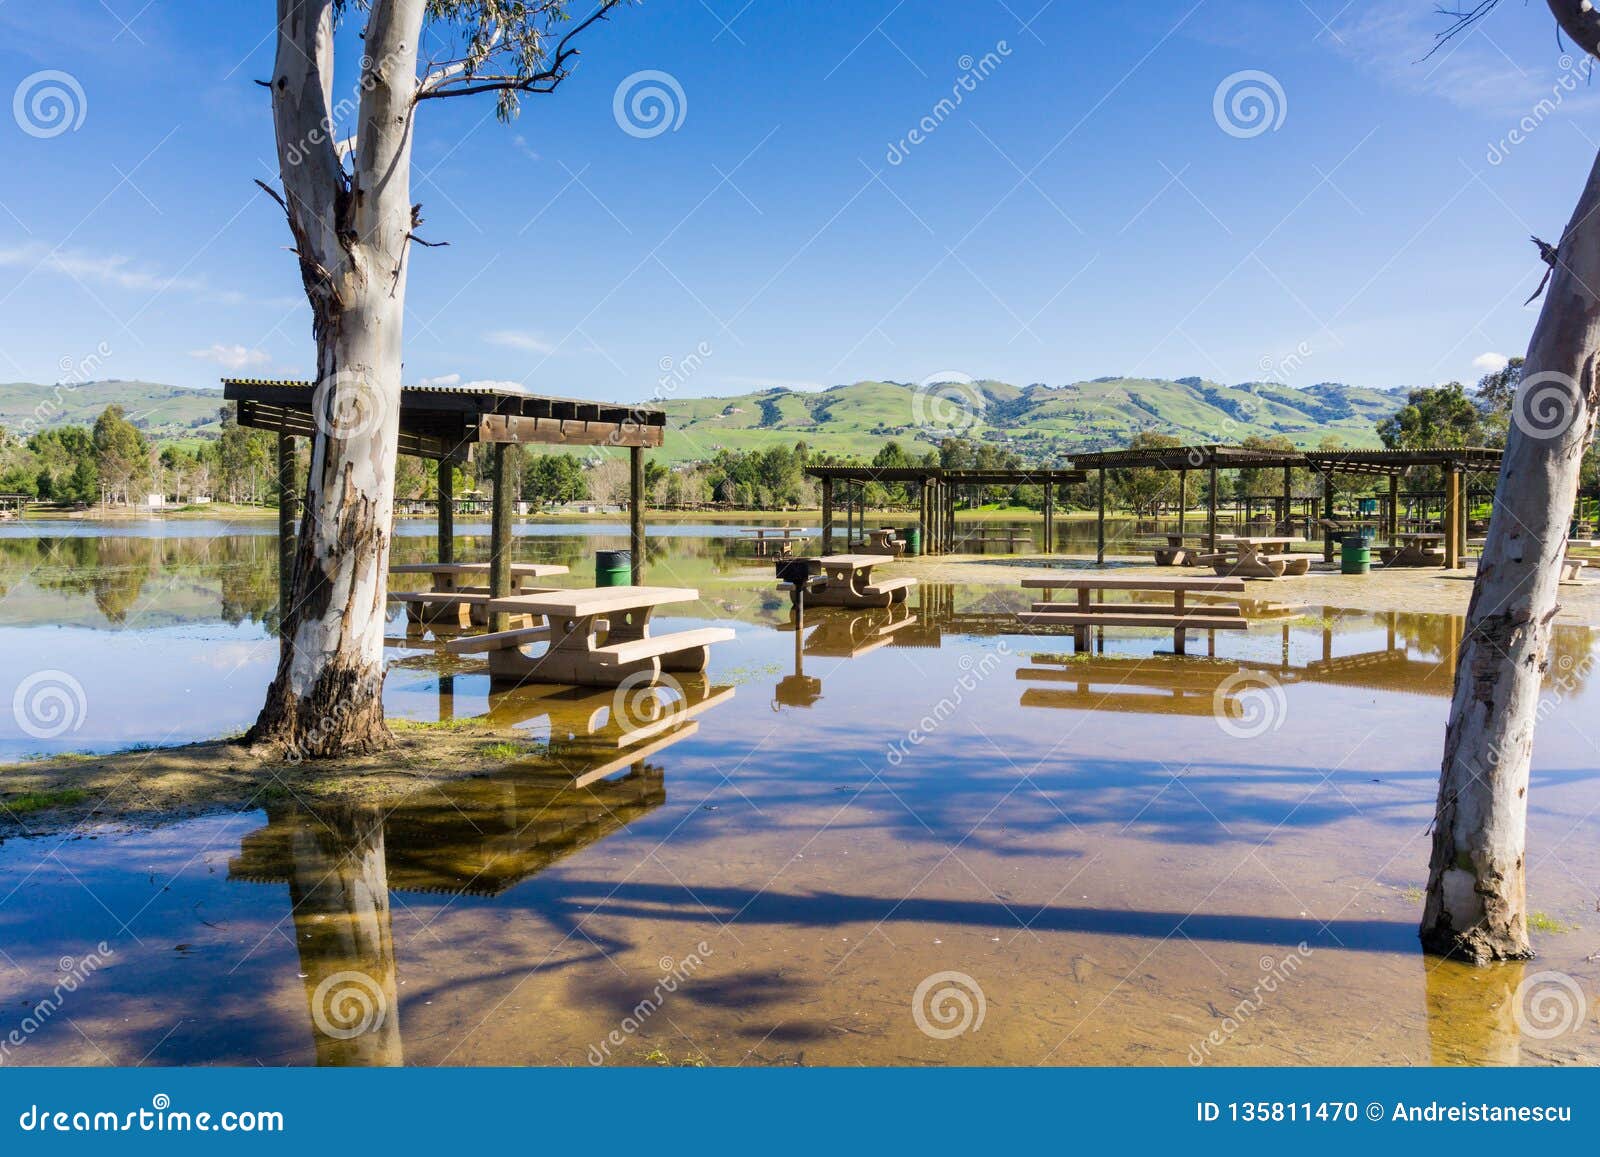 Flooded Meadow And Picnic Tables, Cunningham Lake, San Jose, South San